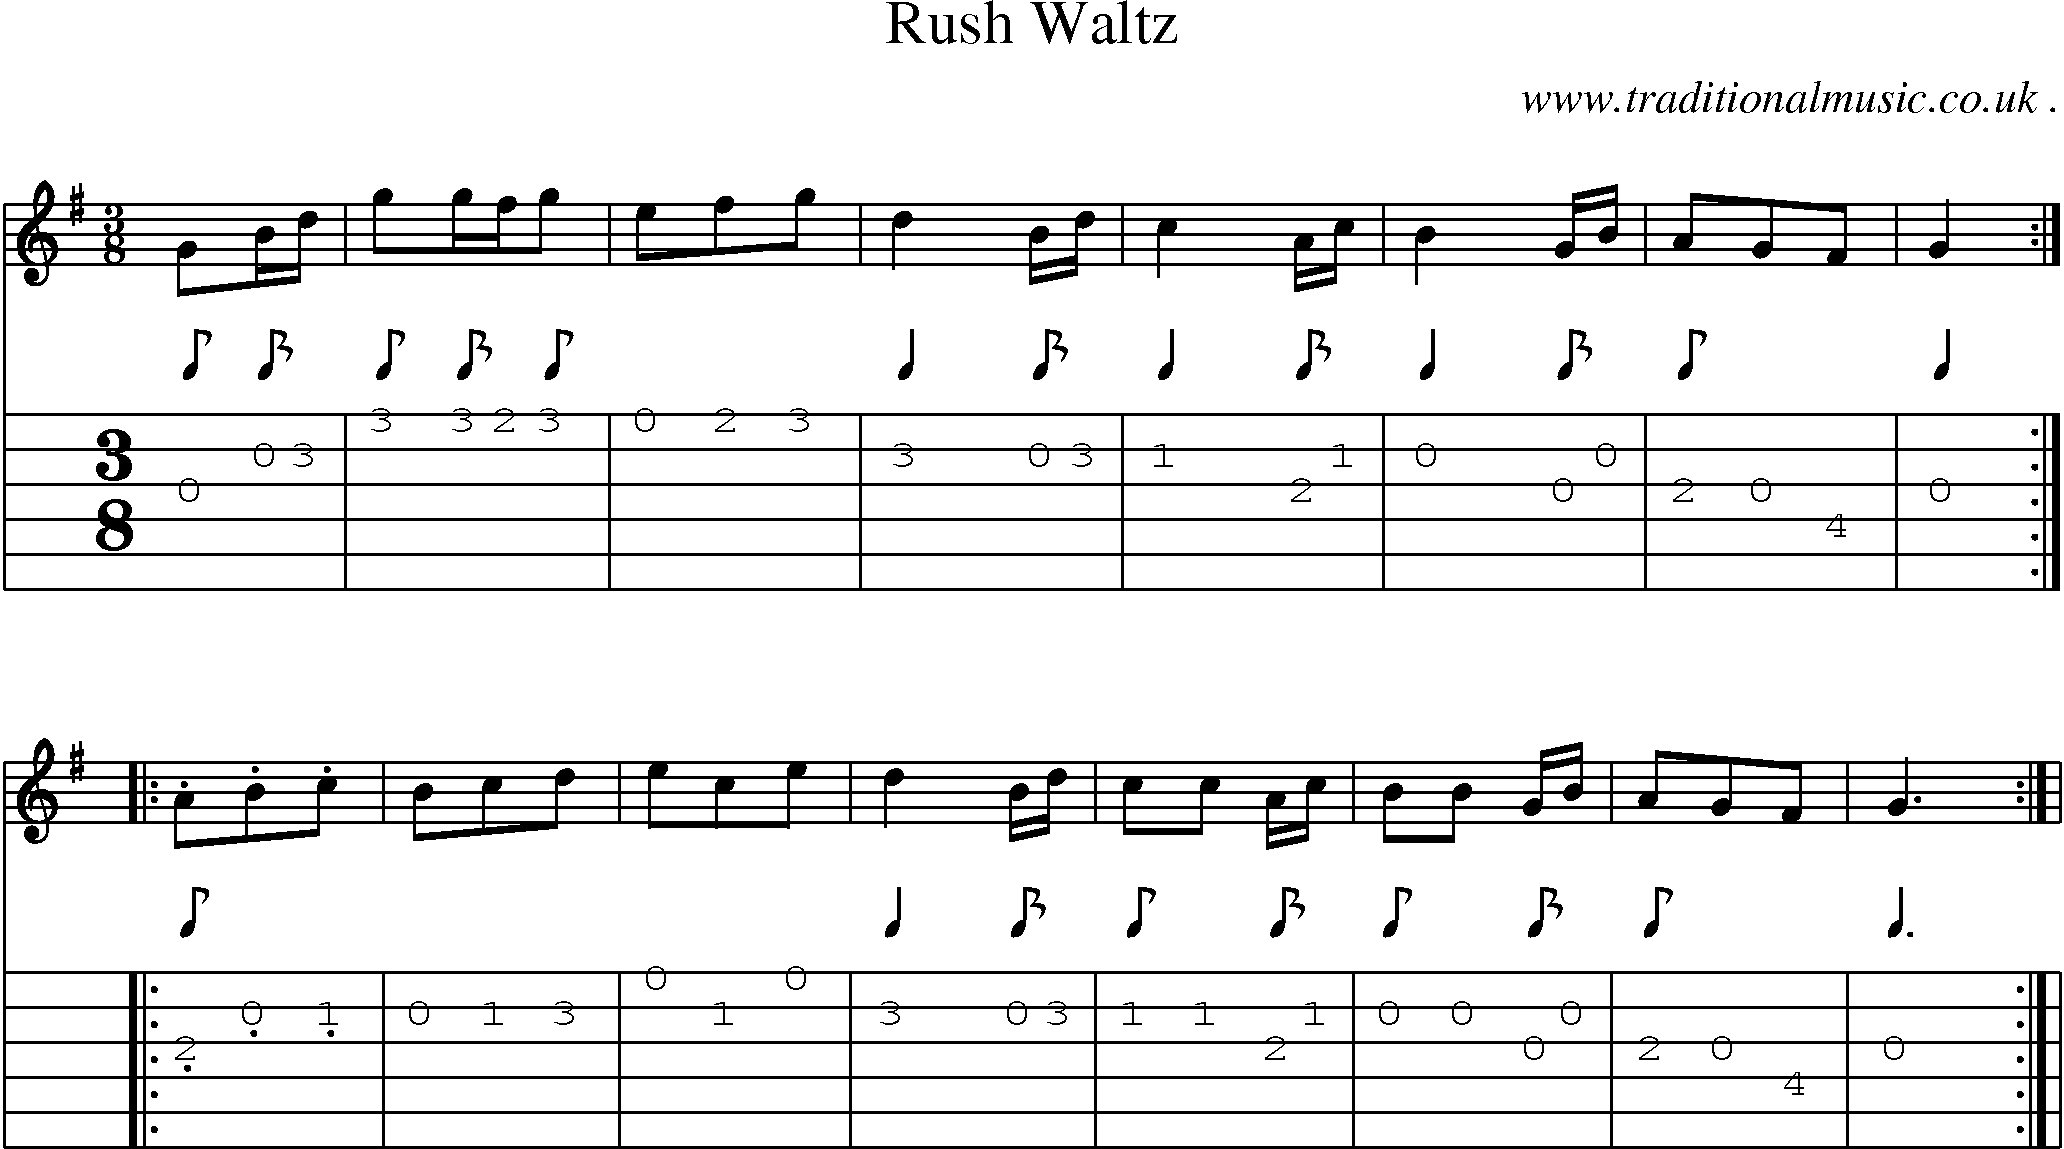 Sheet-Music and Guitar Tabs for Rush Waltz